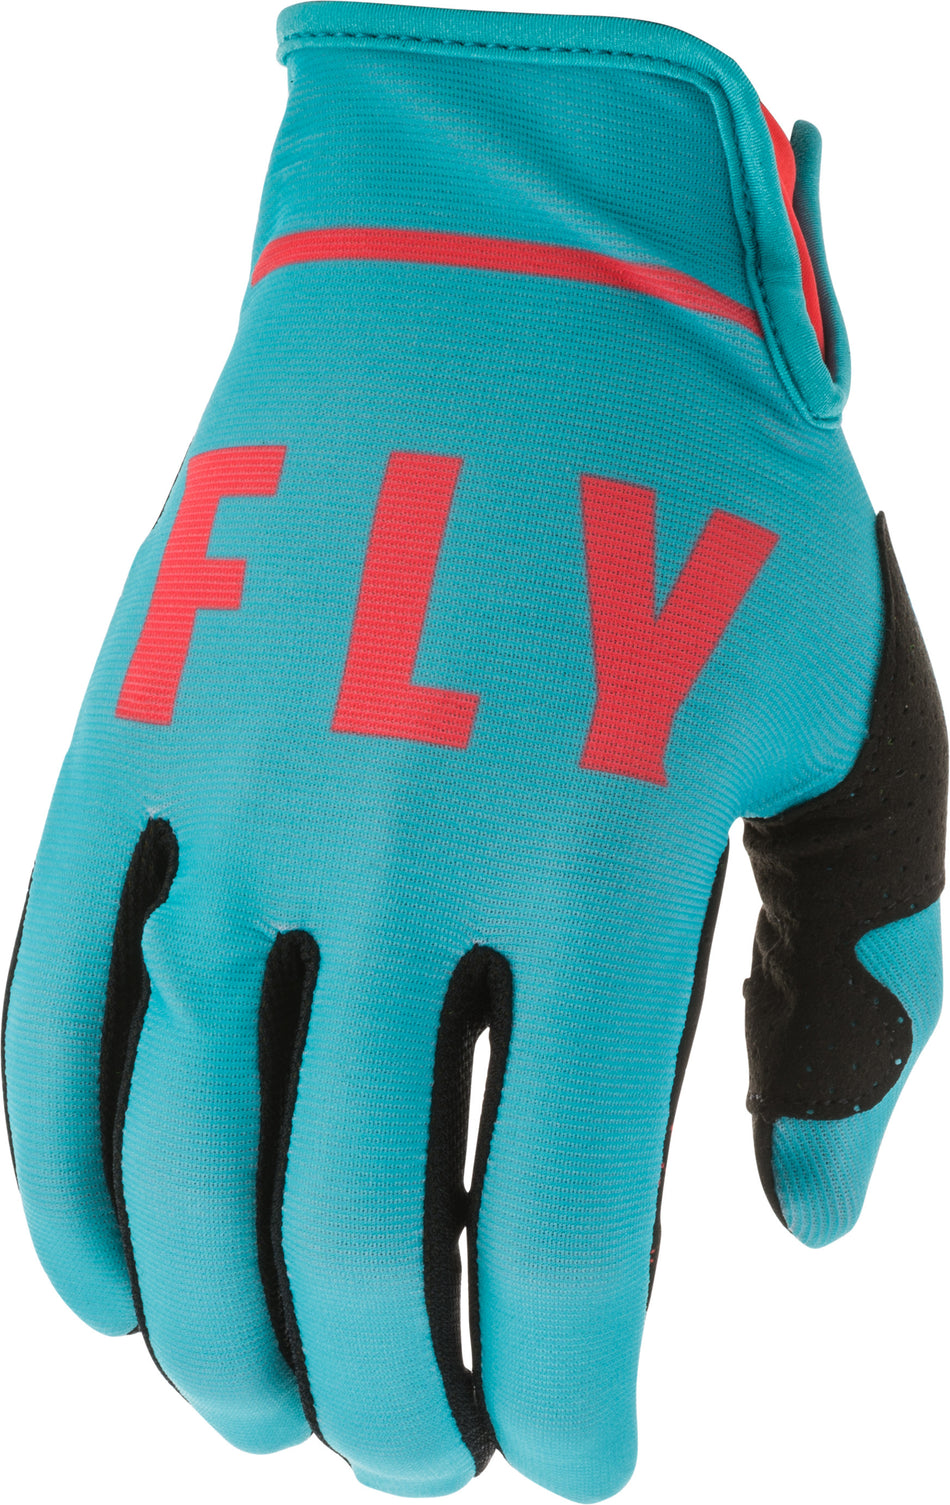 FLY RACING Lite Gloves Blue/Coral Sz 11 373-71911